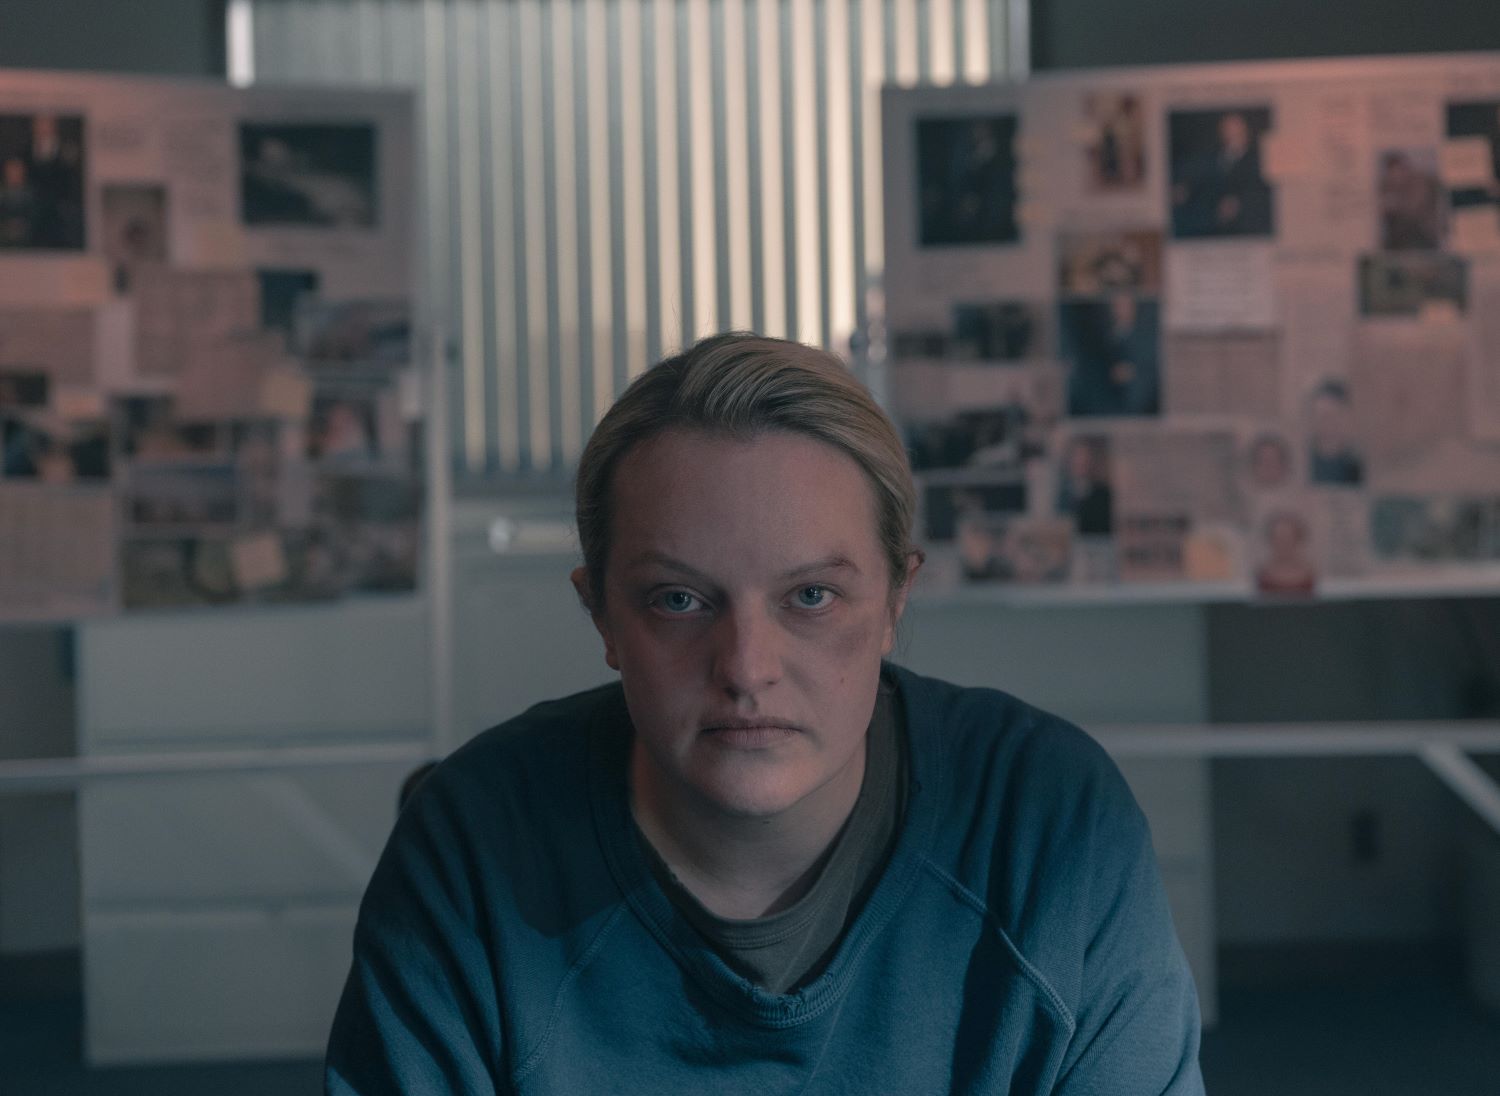 June Osborne wears a blue shirt and stares directly into the camera in 'The Handmaid's Tale'